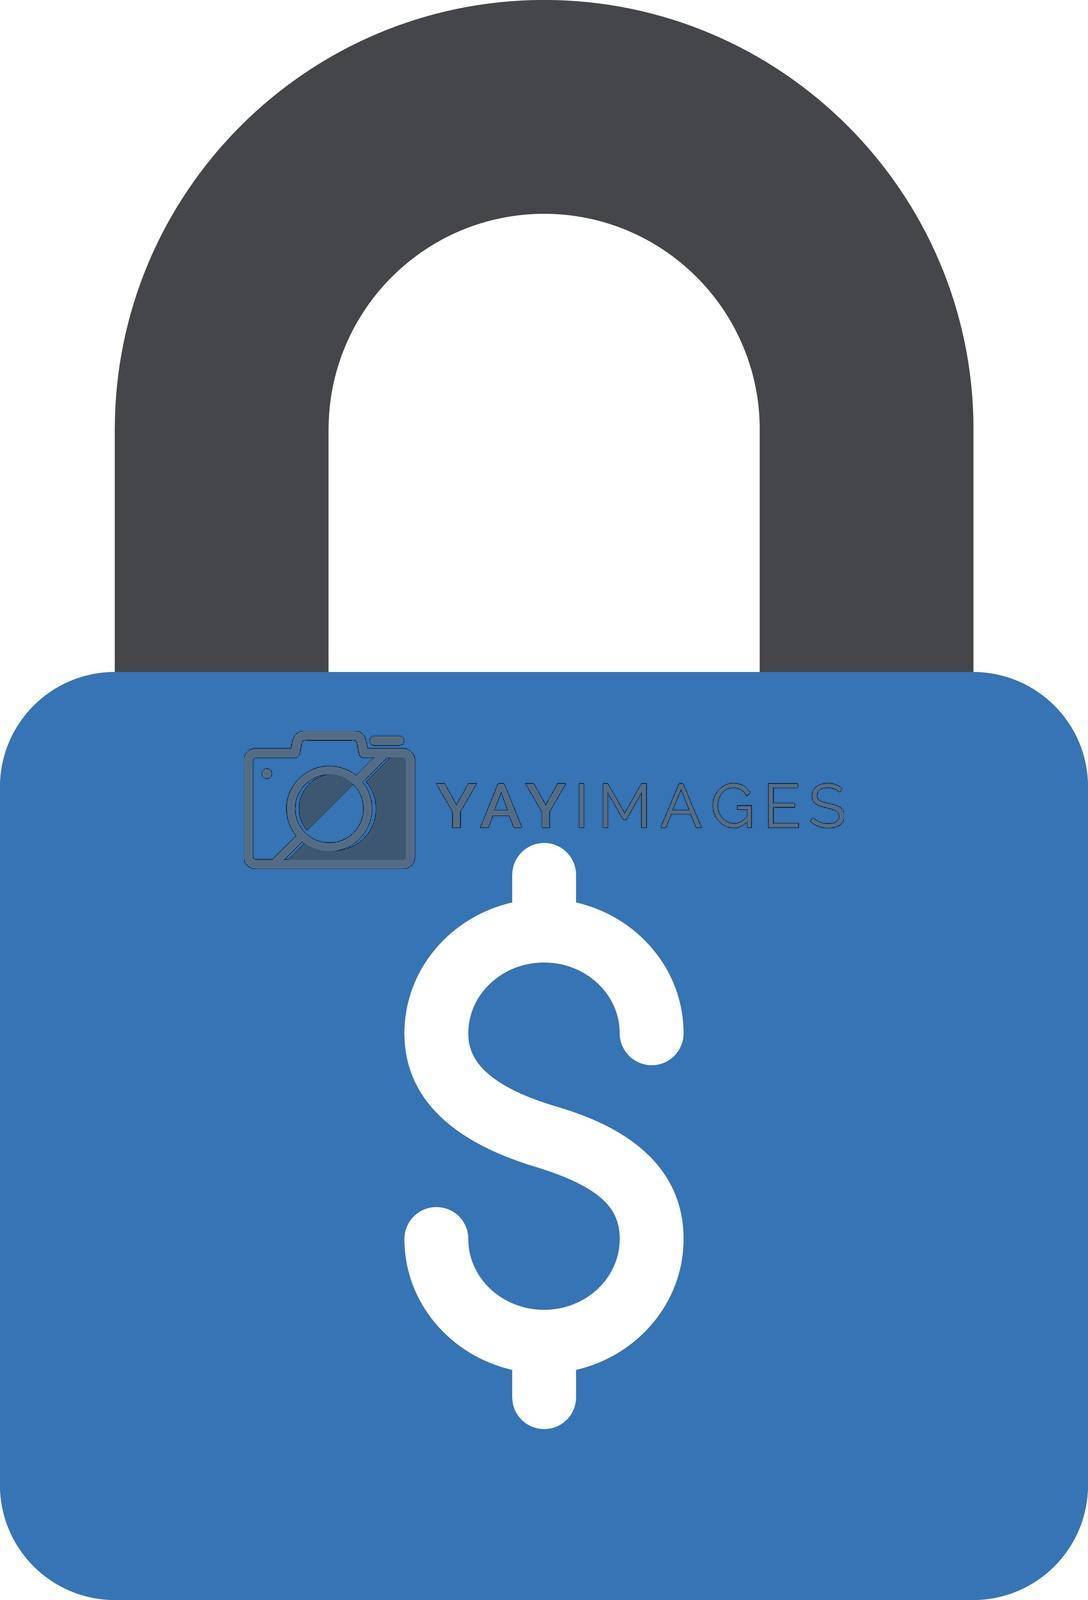 Royalty free image of protection by vectorstall